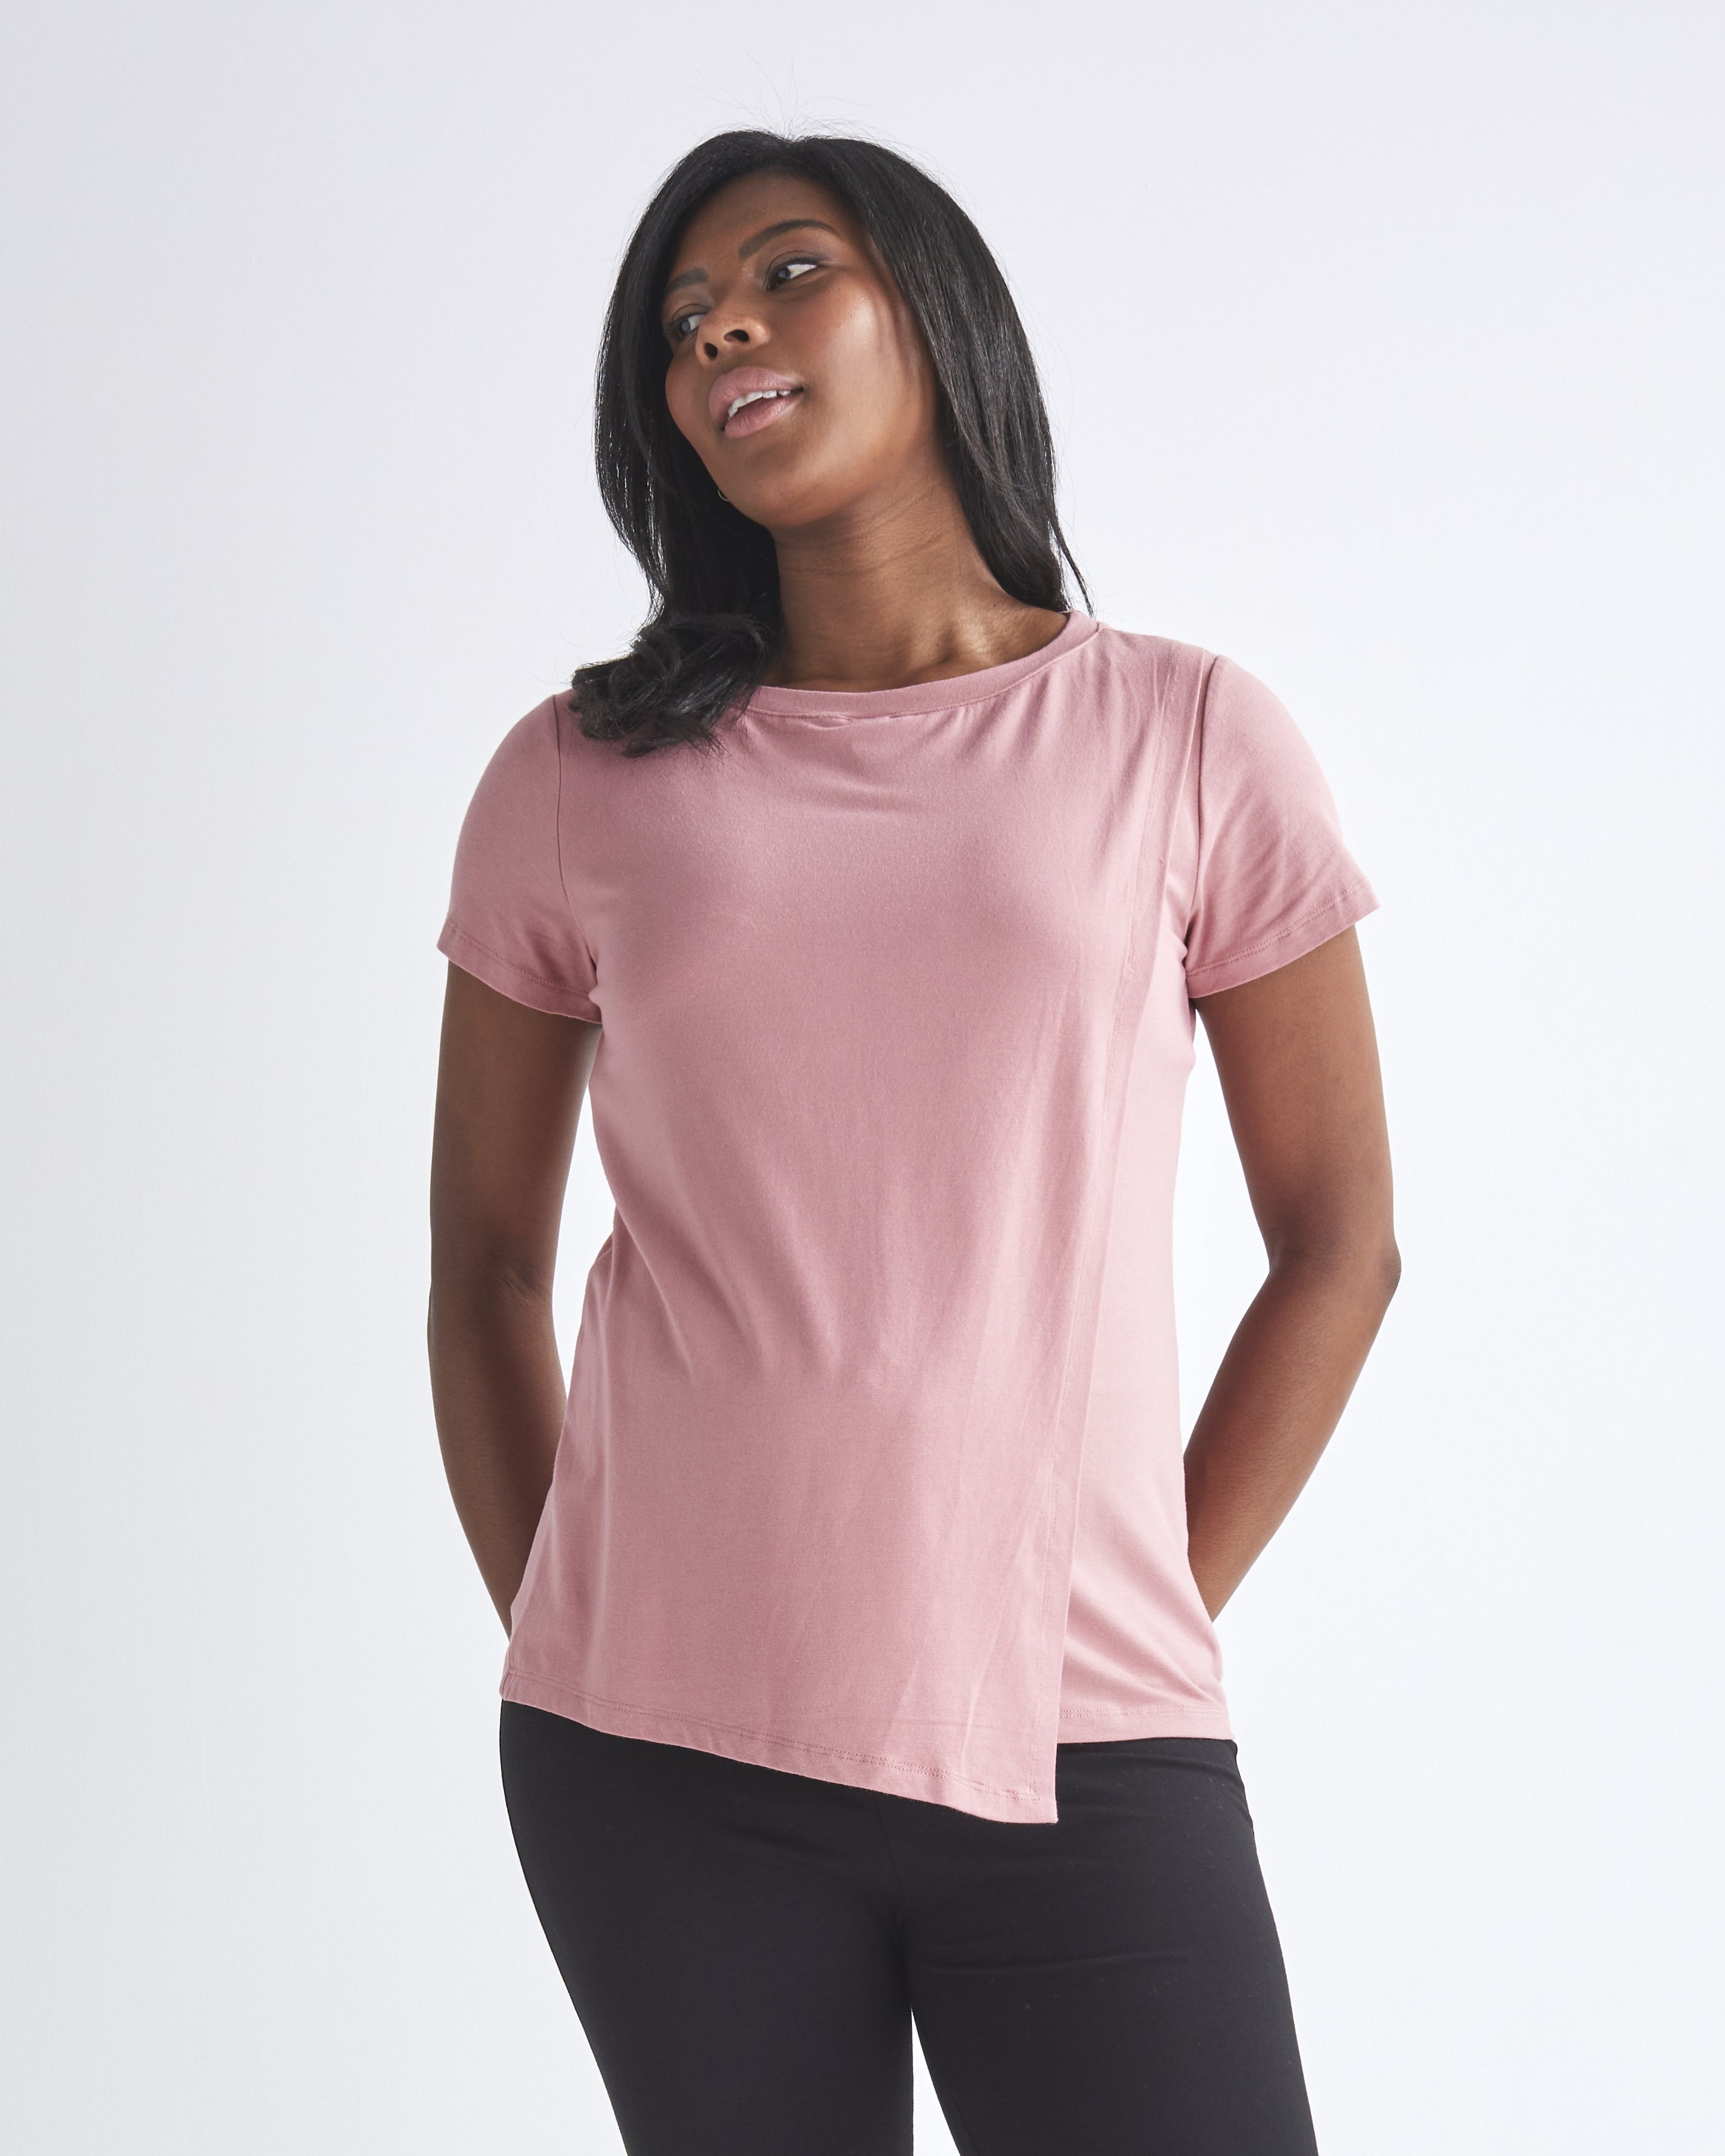 A woman wearing easy access to breastfeeding nursing top with petal front design from Angel Maternity